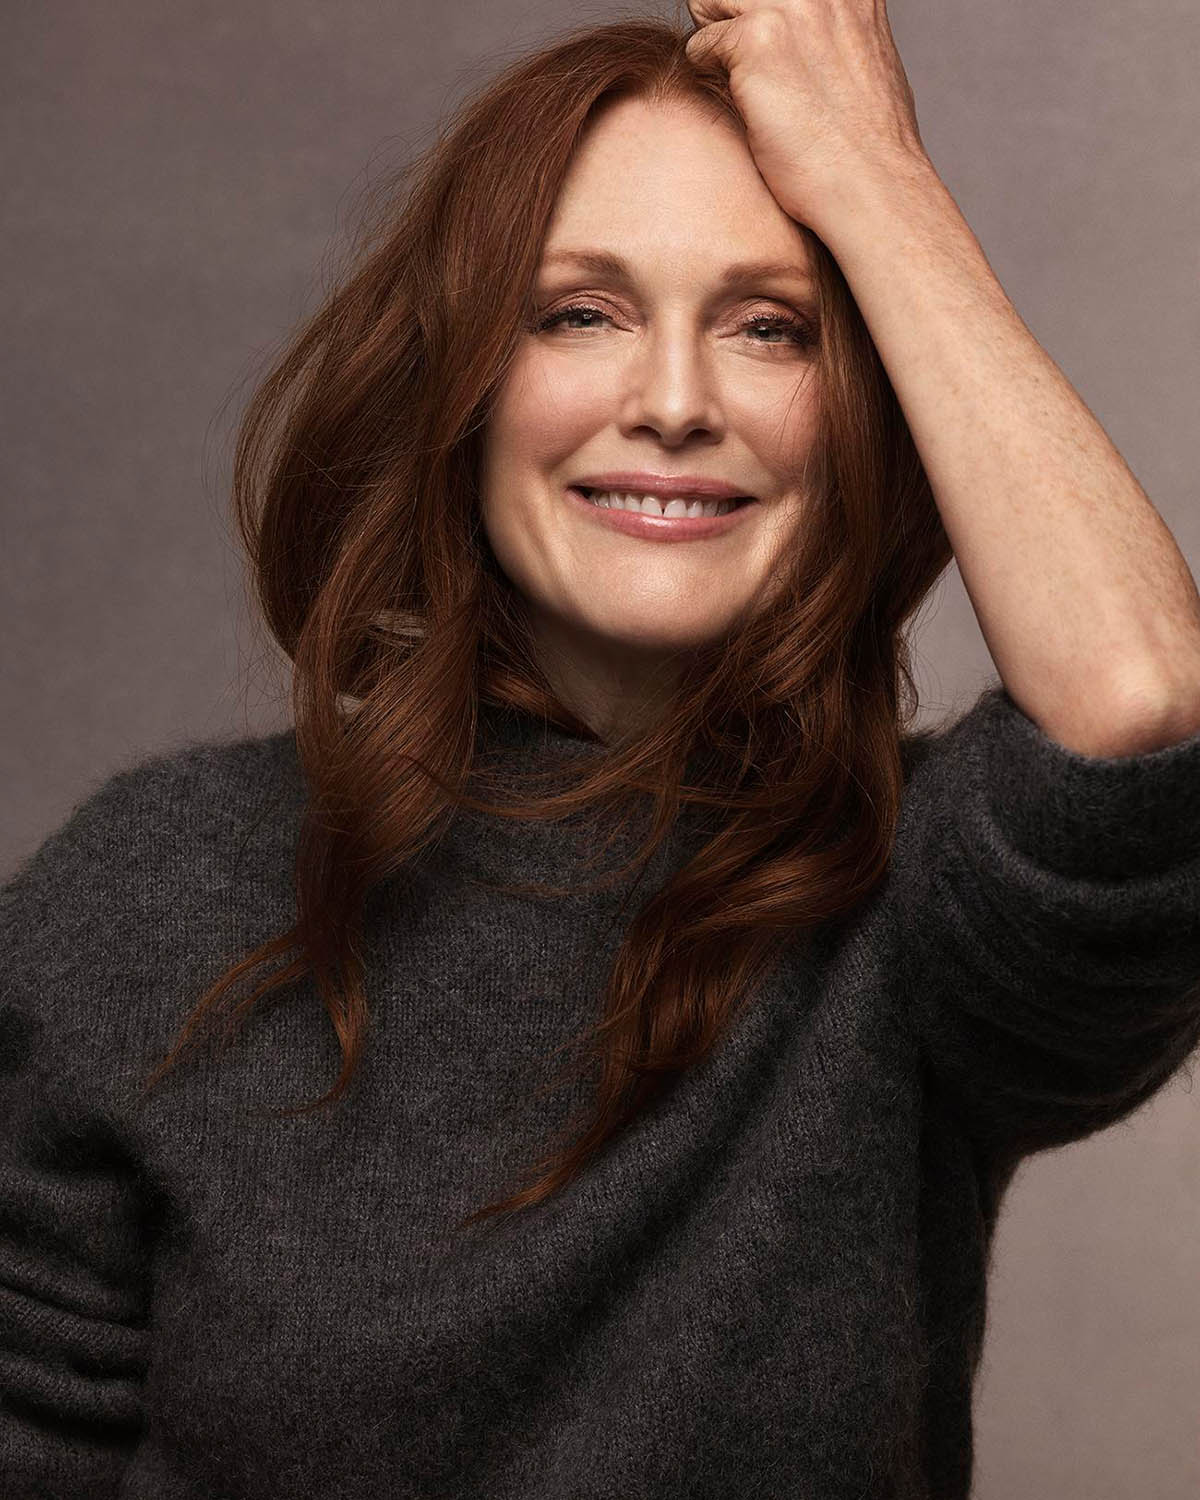 Julianne Moore covers The Sunday Times Style May 30th, 2021 by Craig McDean